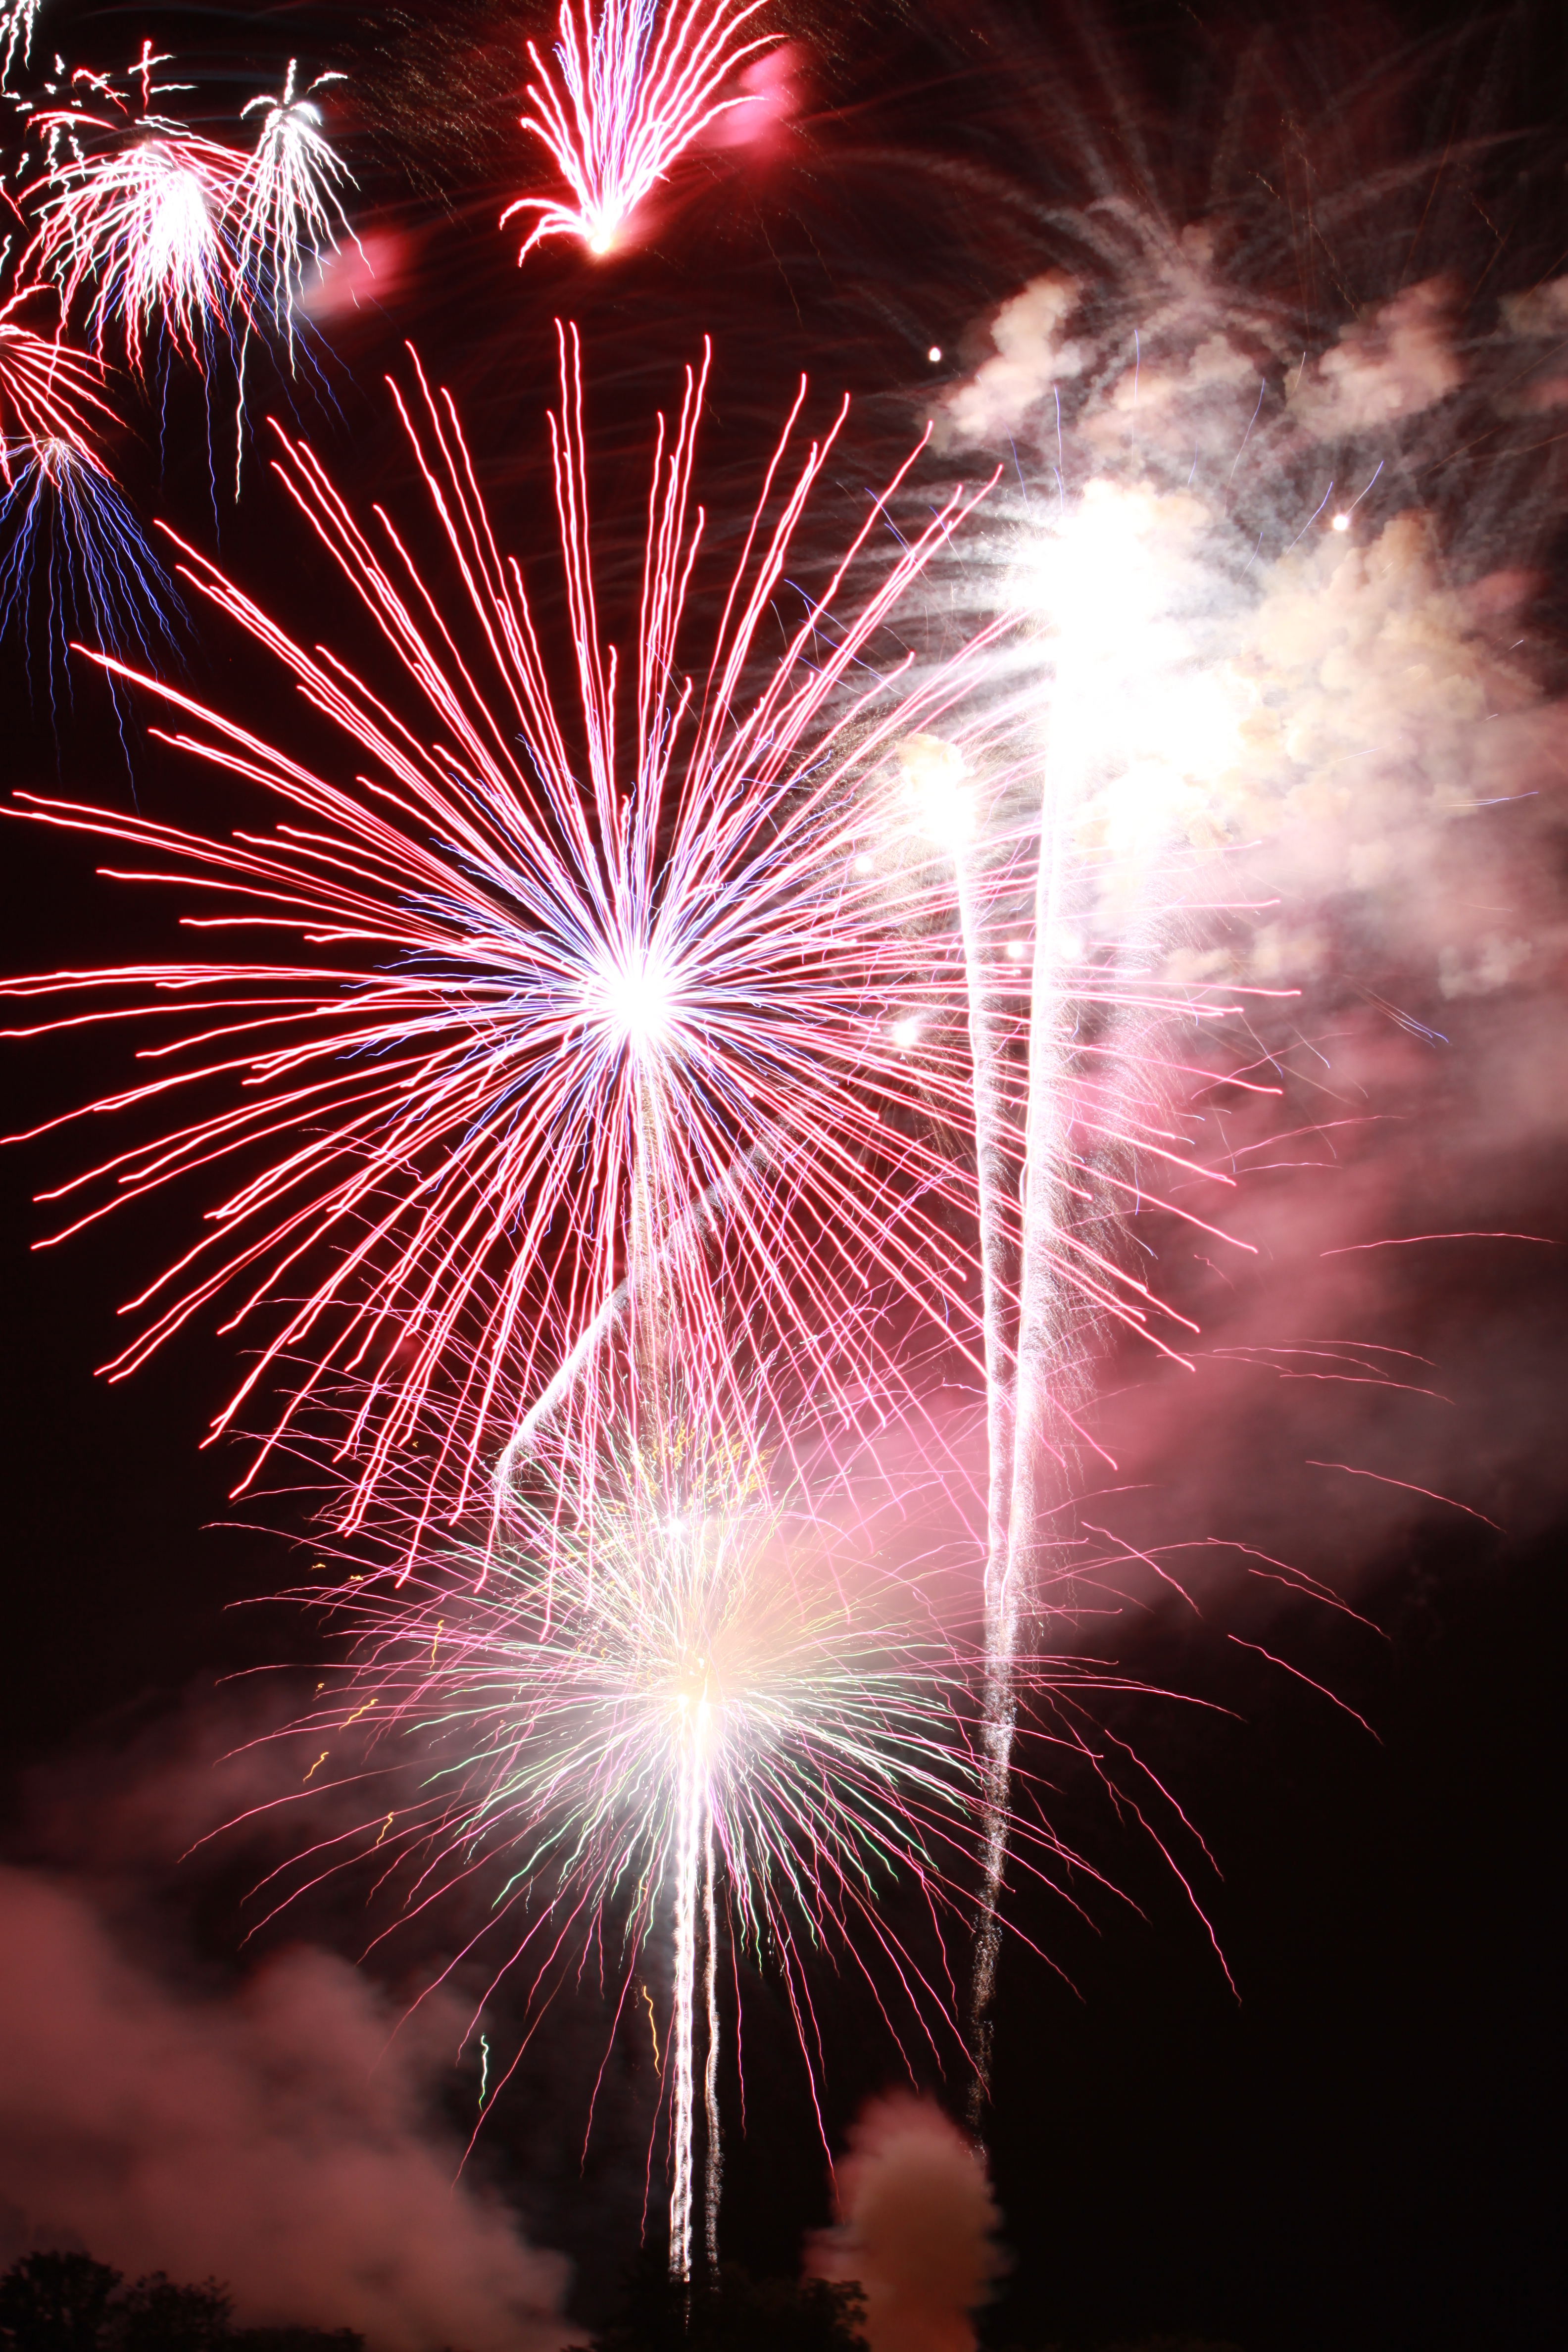 Fire Department Urges Fireworks Safety this Independence Day